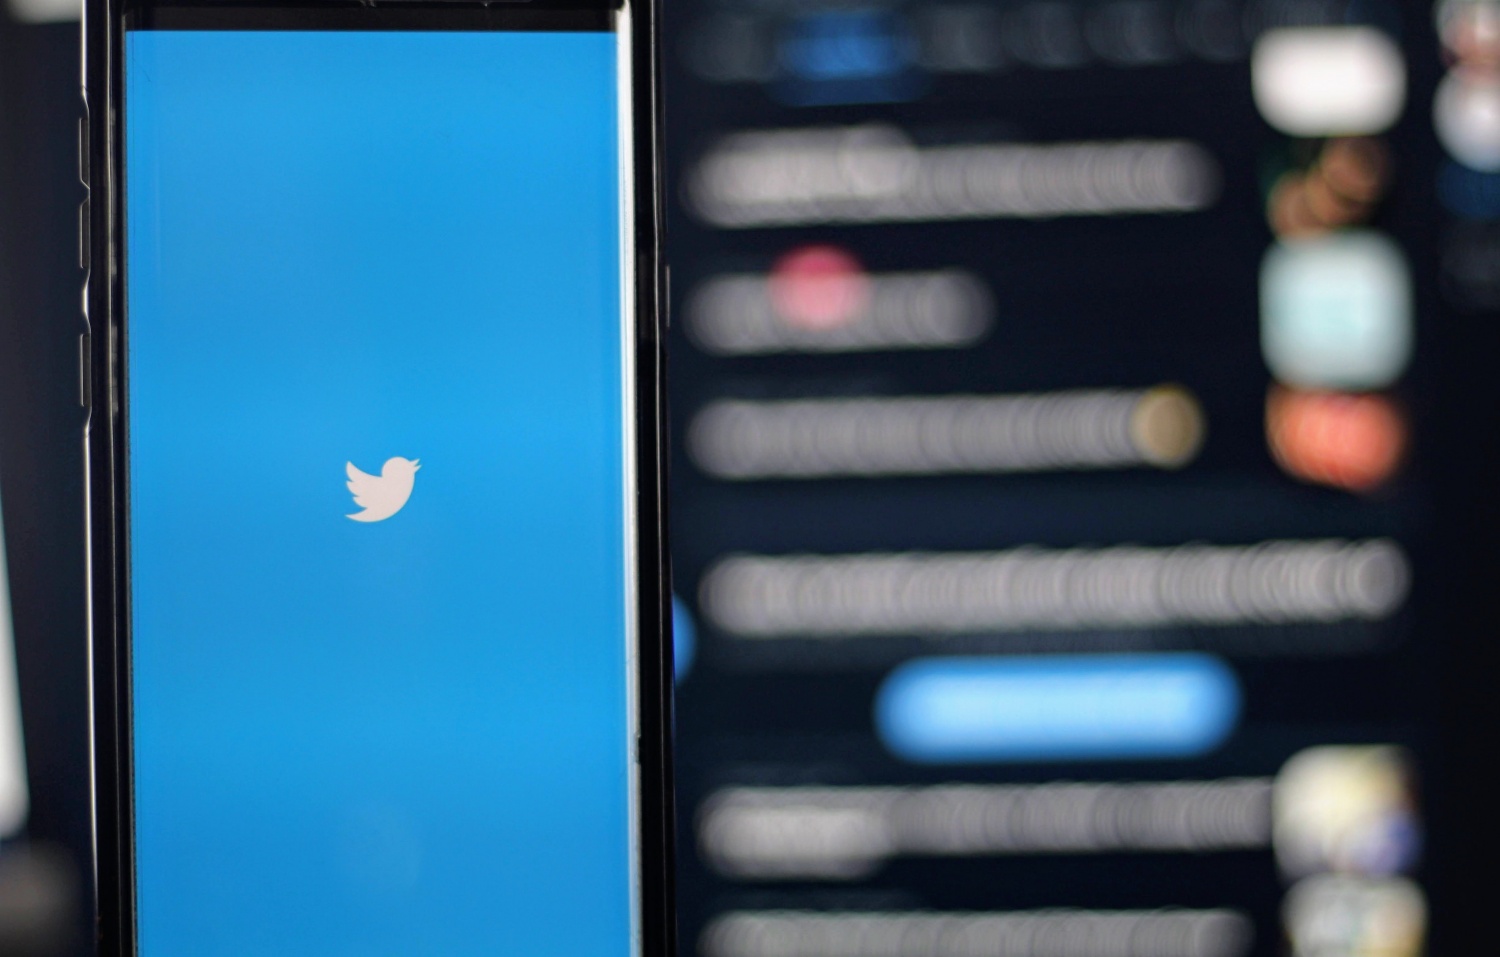 Twitter Tip Jar to Include PayPal, CashApp, and Cryptocurrency Wallet Addresses, Rumor Suggests